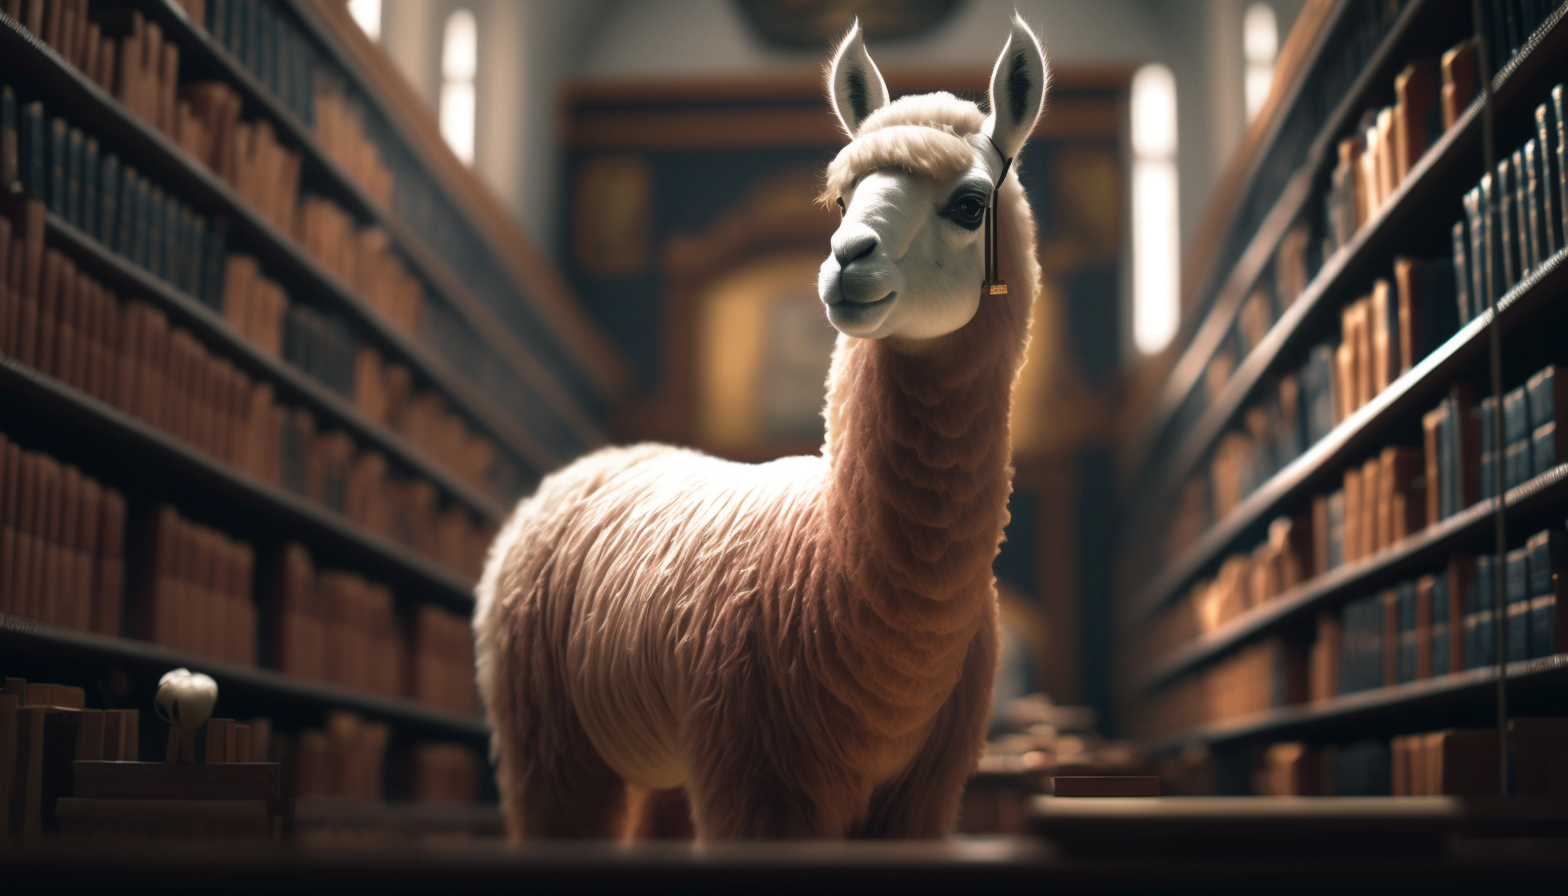 Metas “LLaMA” language model shows that parameters are not everything